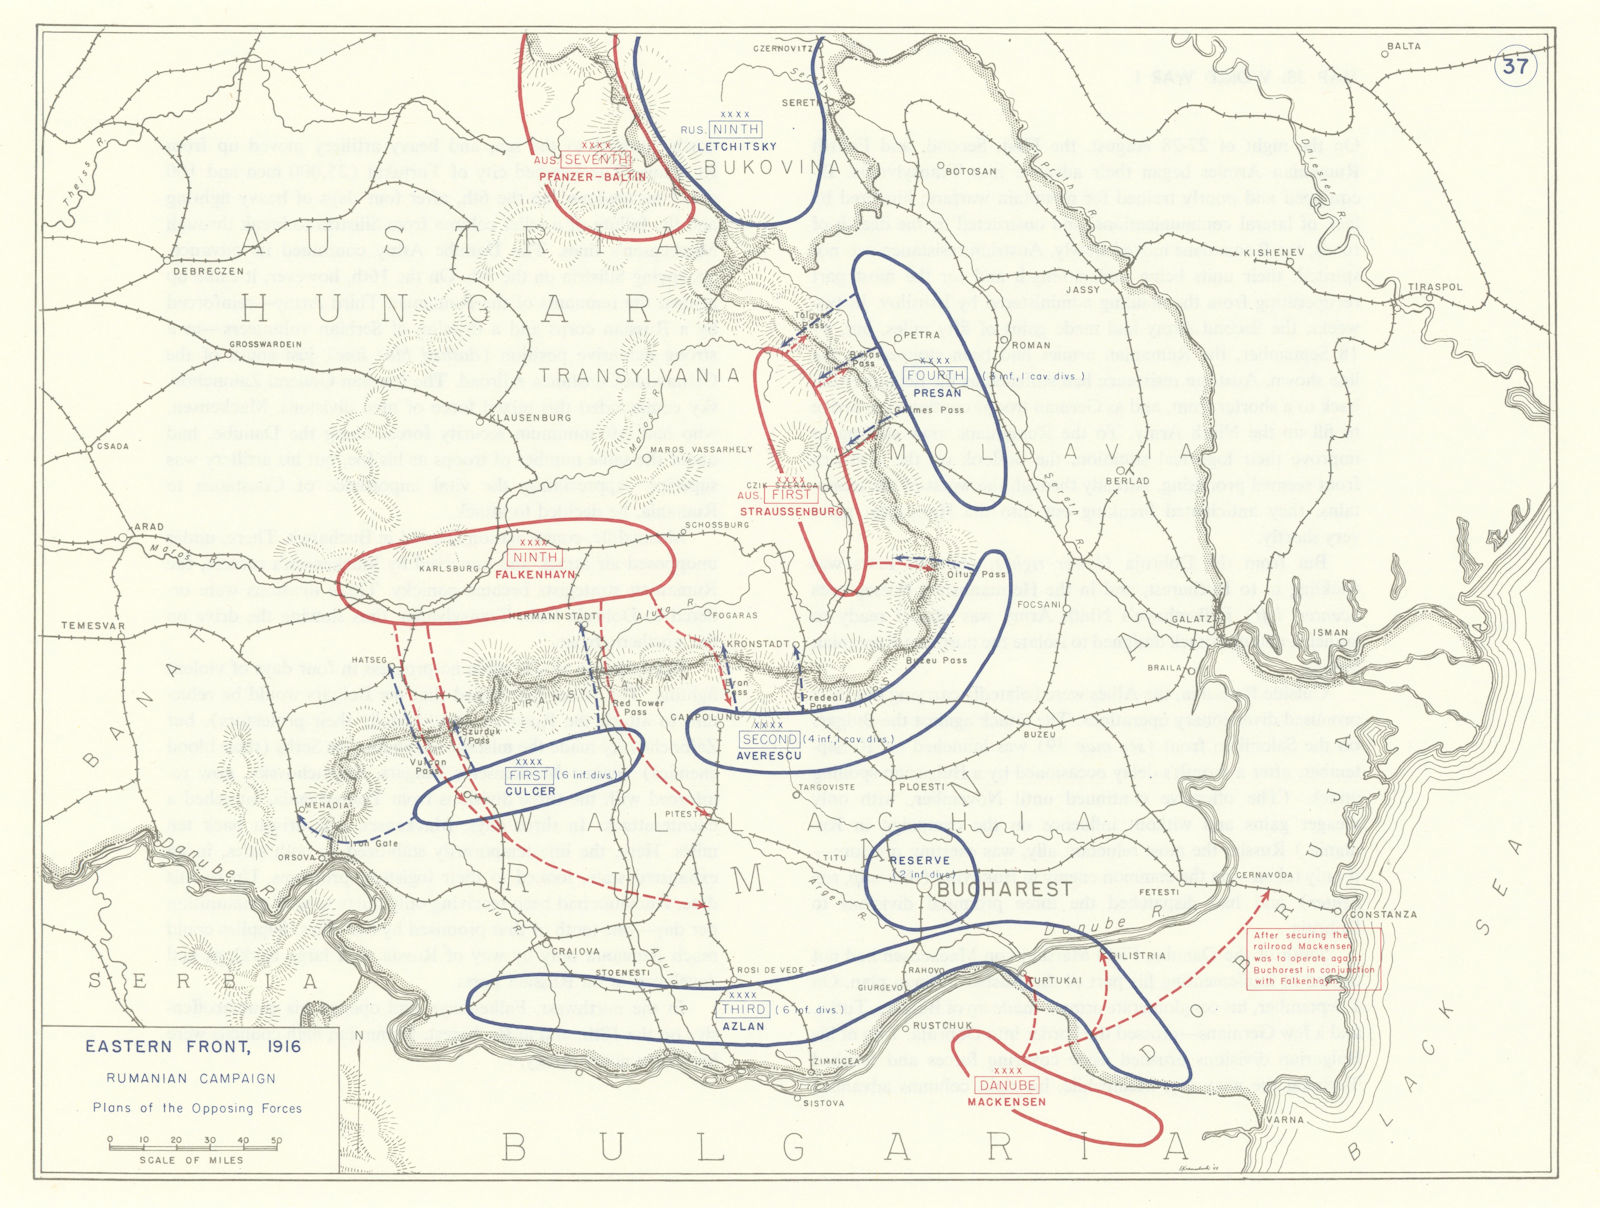 World War 1. Eastern Front 1916. Rumanian Campaign. Opposing Forces 1959 map